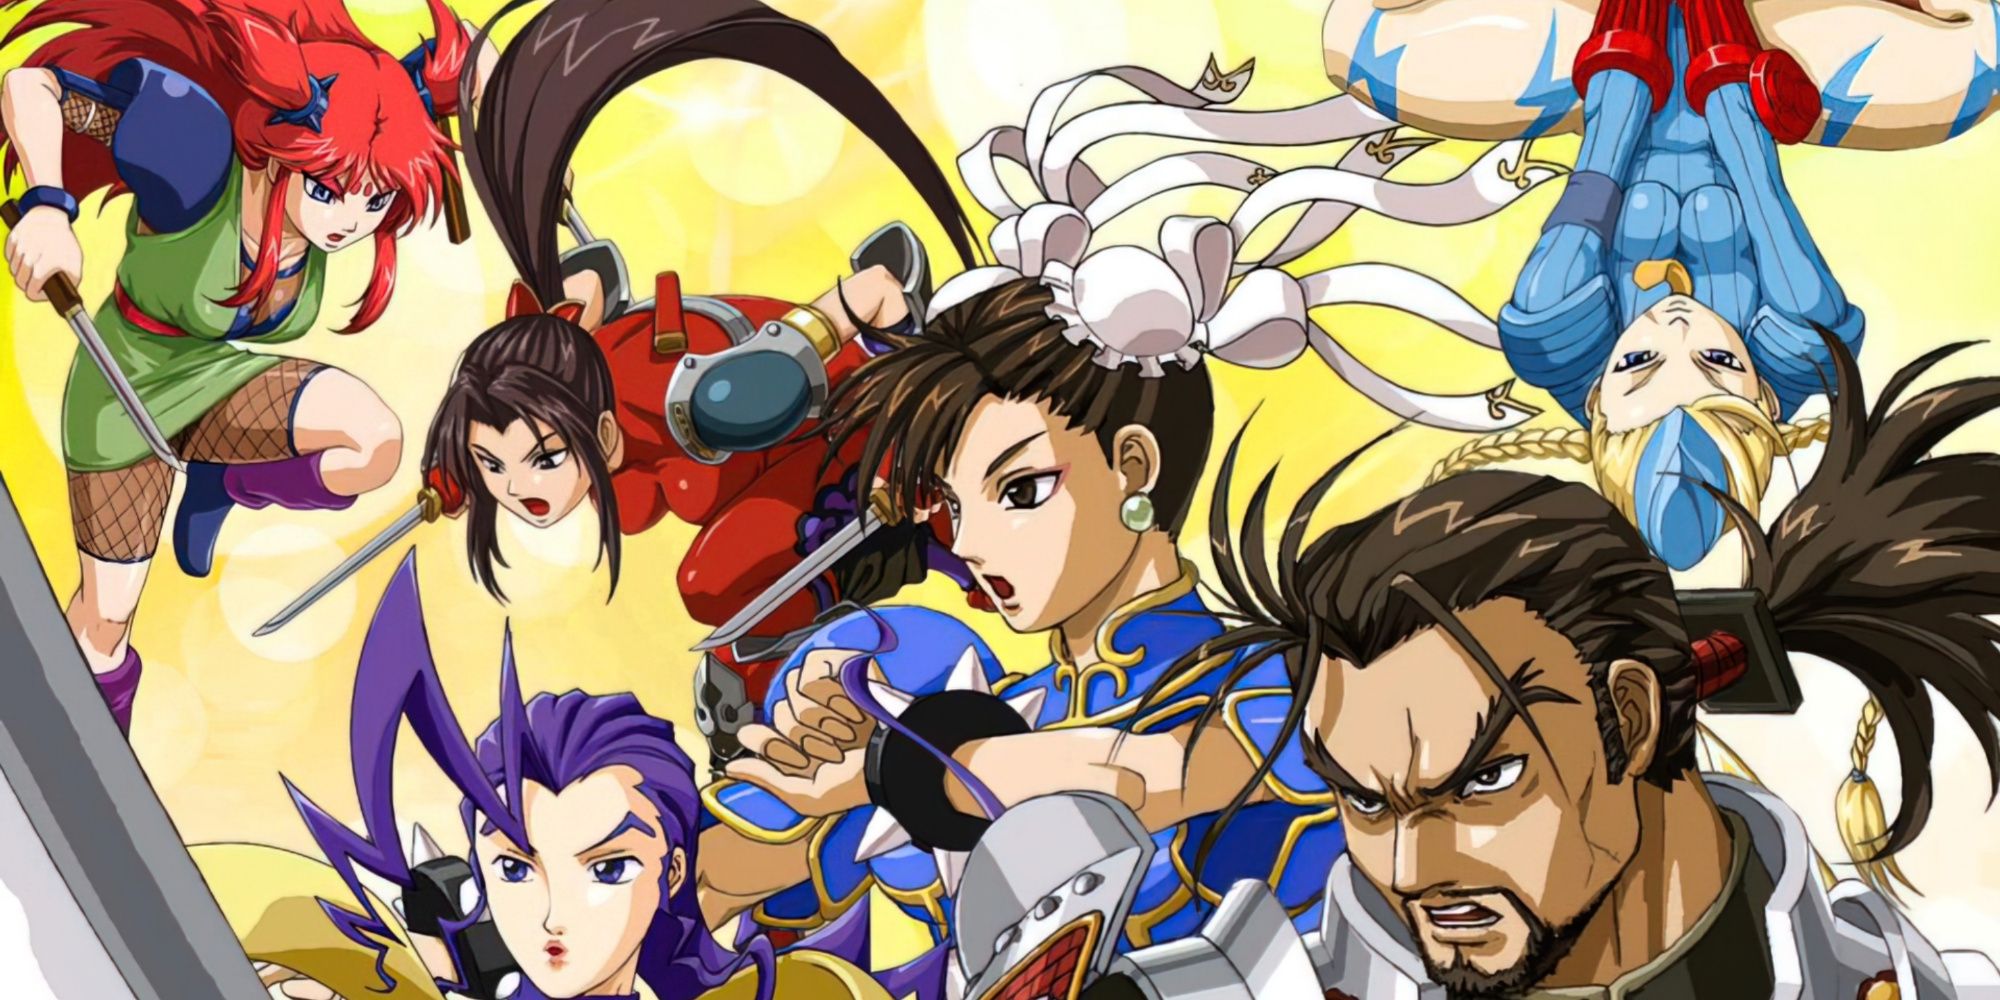 Promo art featuring characters in Namco x Capcom